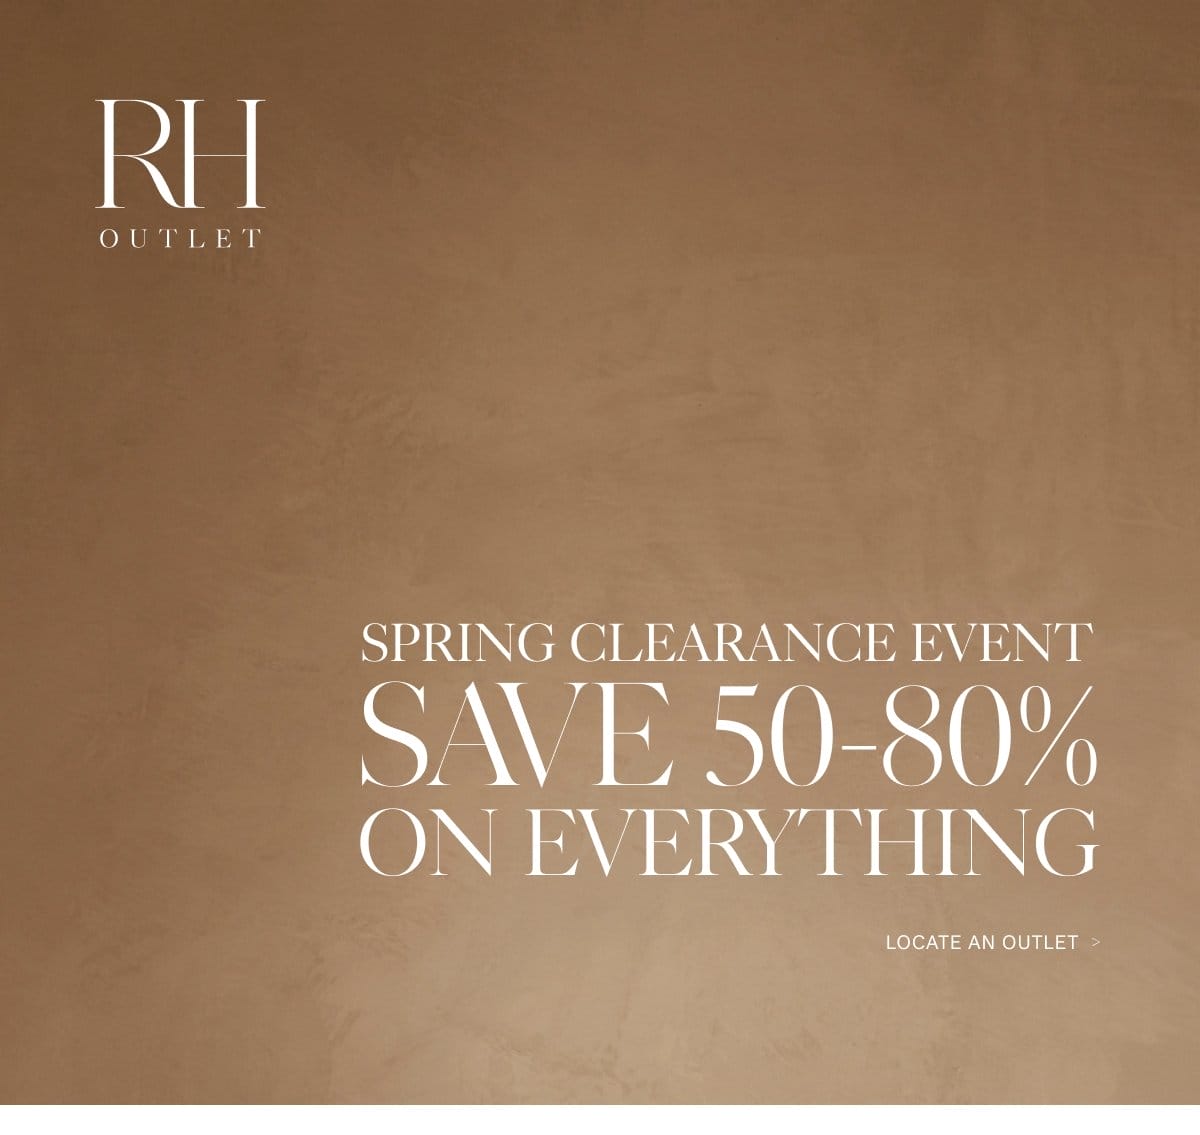 RH Outlet. Spring Clearance Event. Save 50-80% on Everything. Locate an Outlet.